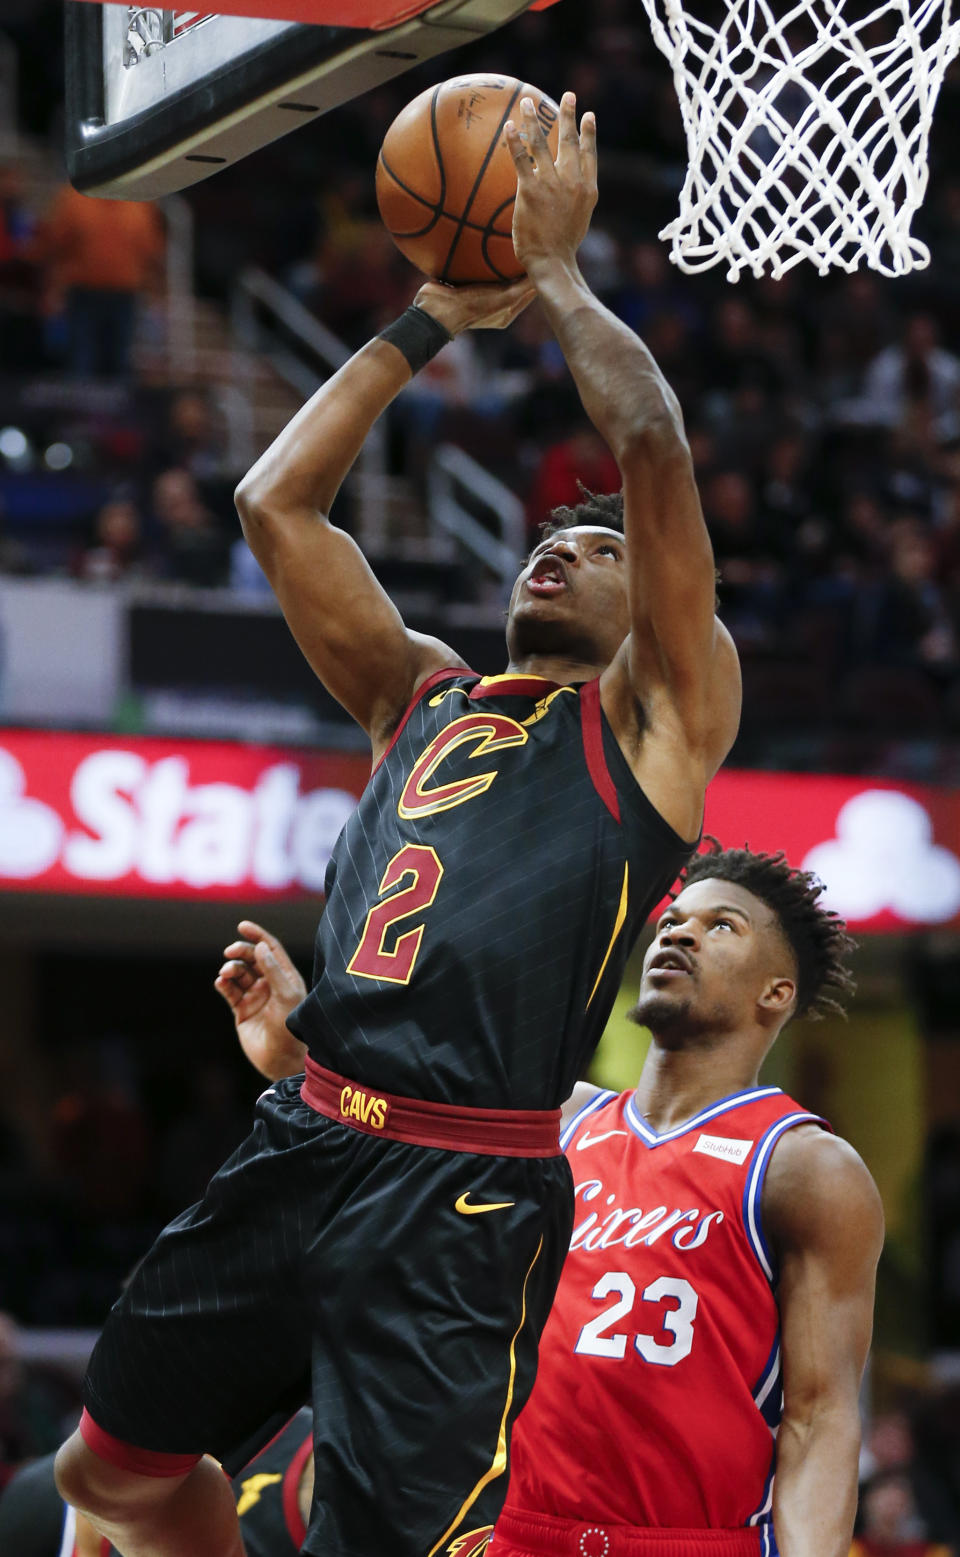 Cleveland Cavaliers' Collin Sexton (2) scores past Philadelphia 76ers' Jimmy Butler (23) during the first half of an NBA basketball game Sunday, Dec. 16, 2018, in Cleveland. (AP Photo/Ron Schwane)